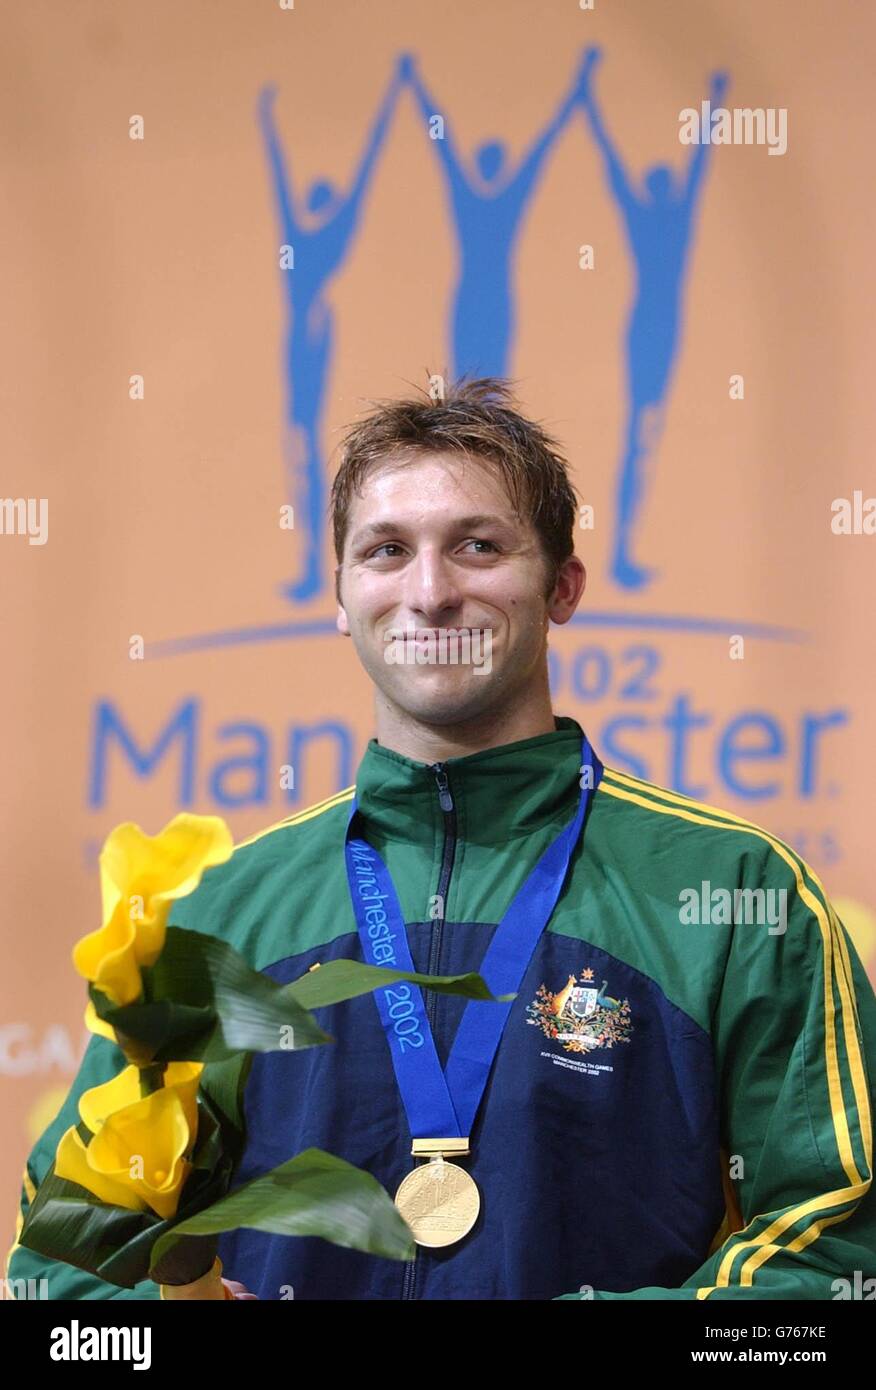 Swimming - Australia's Ian Thorpe. Australia's Ian Thorpe after winning another gold medal in the men's 100m Freestyle Finals at the Manchester Aquatic Centre, Manchester. Stock Photo